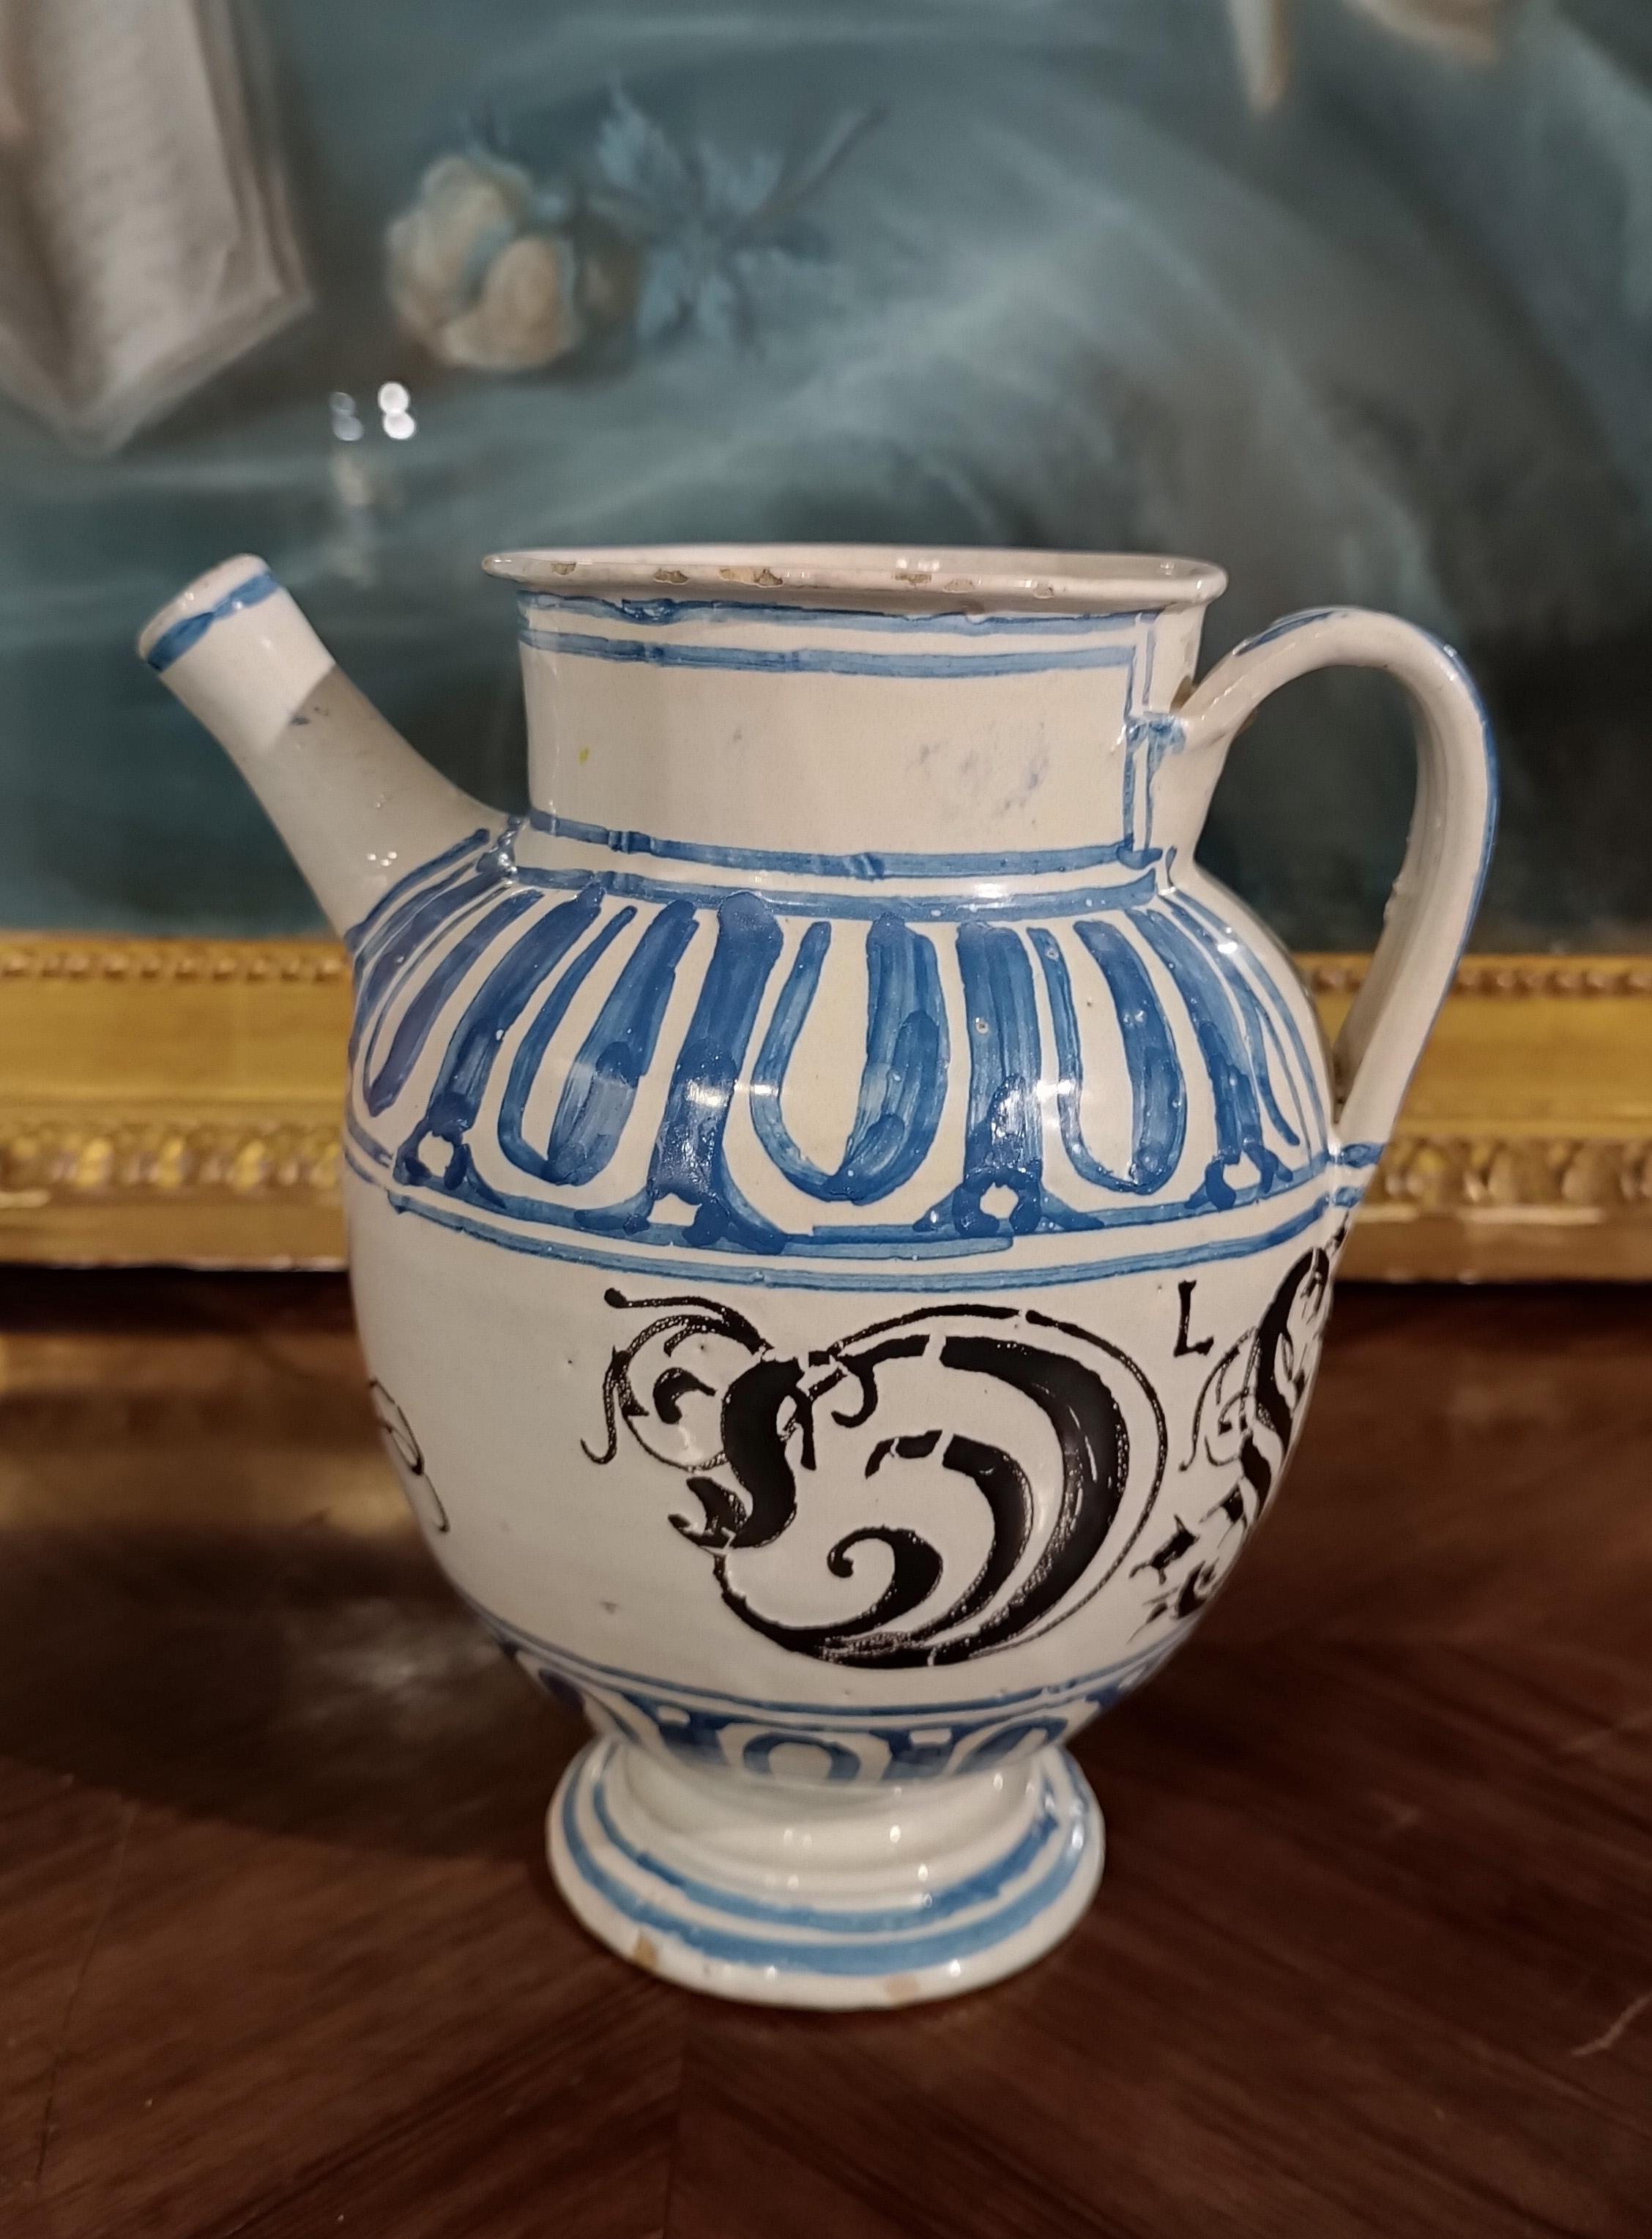 Enameled END OF THE 17th CENTURY WHITE AND BLUE MAJOLICA JUG 